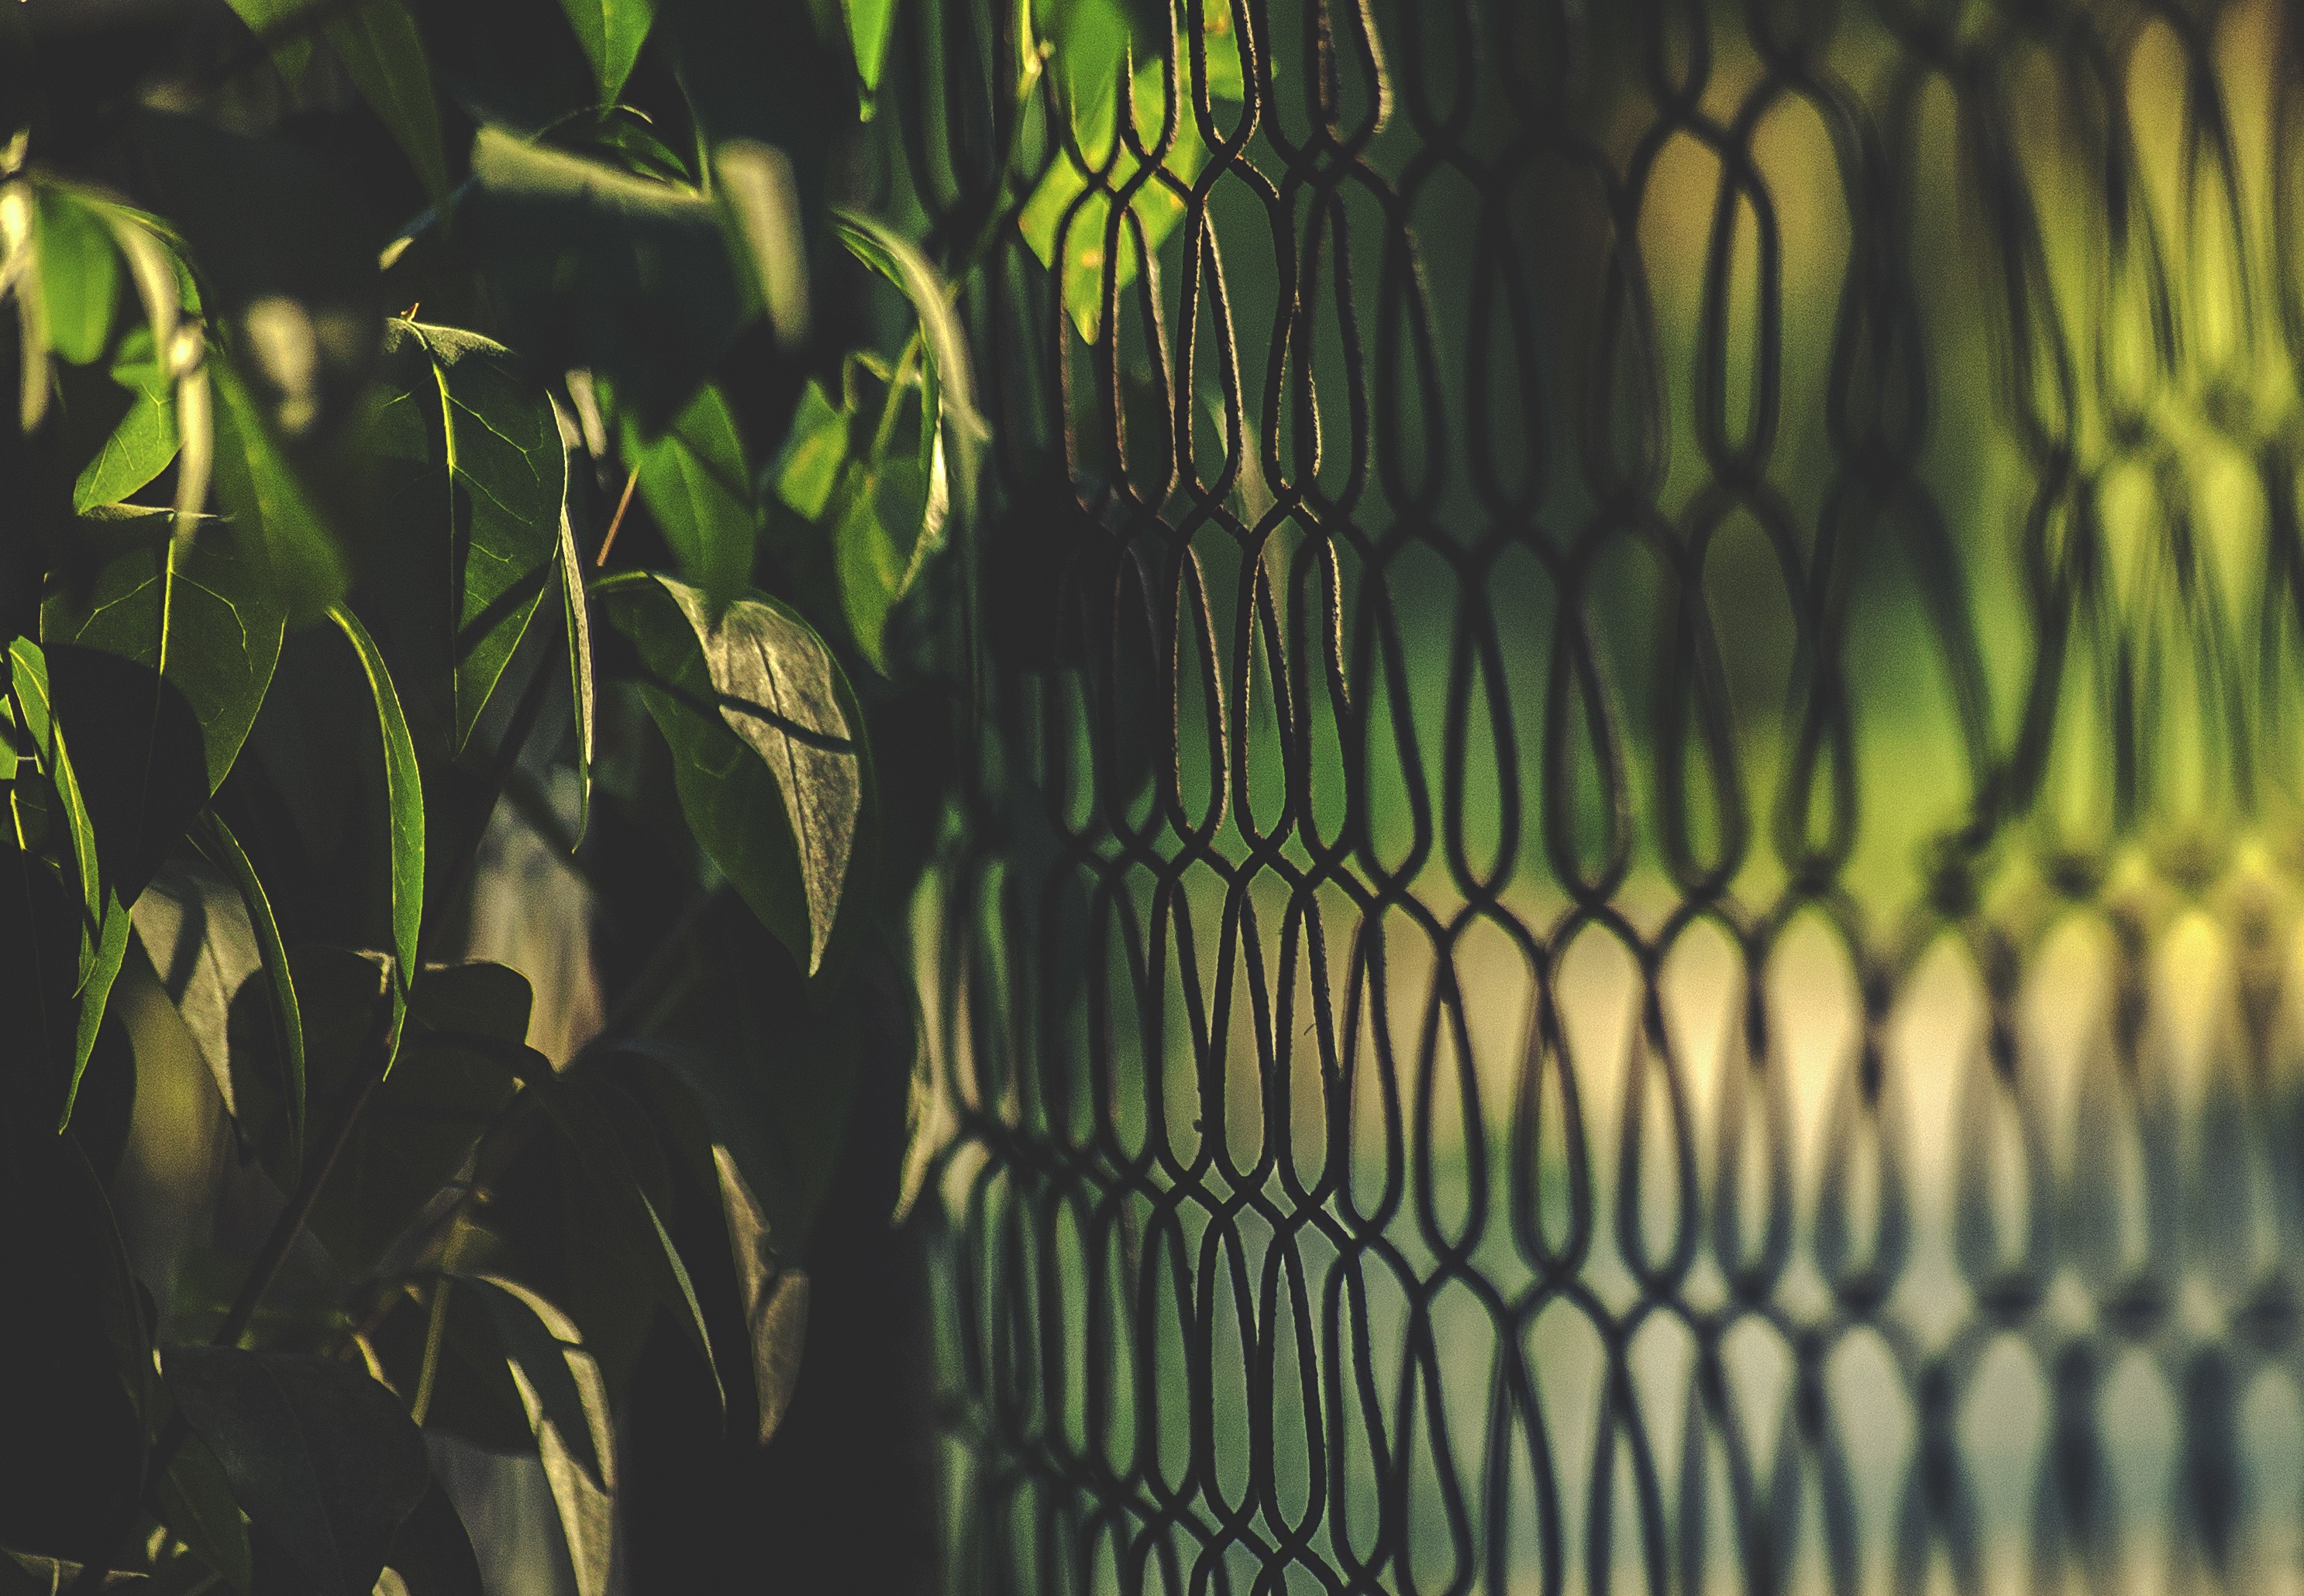 Chain Link Plants Fence Leaves 2973x2060